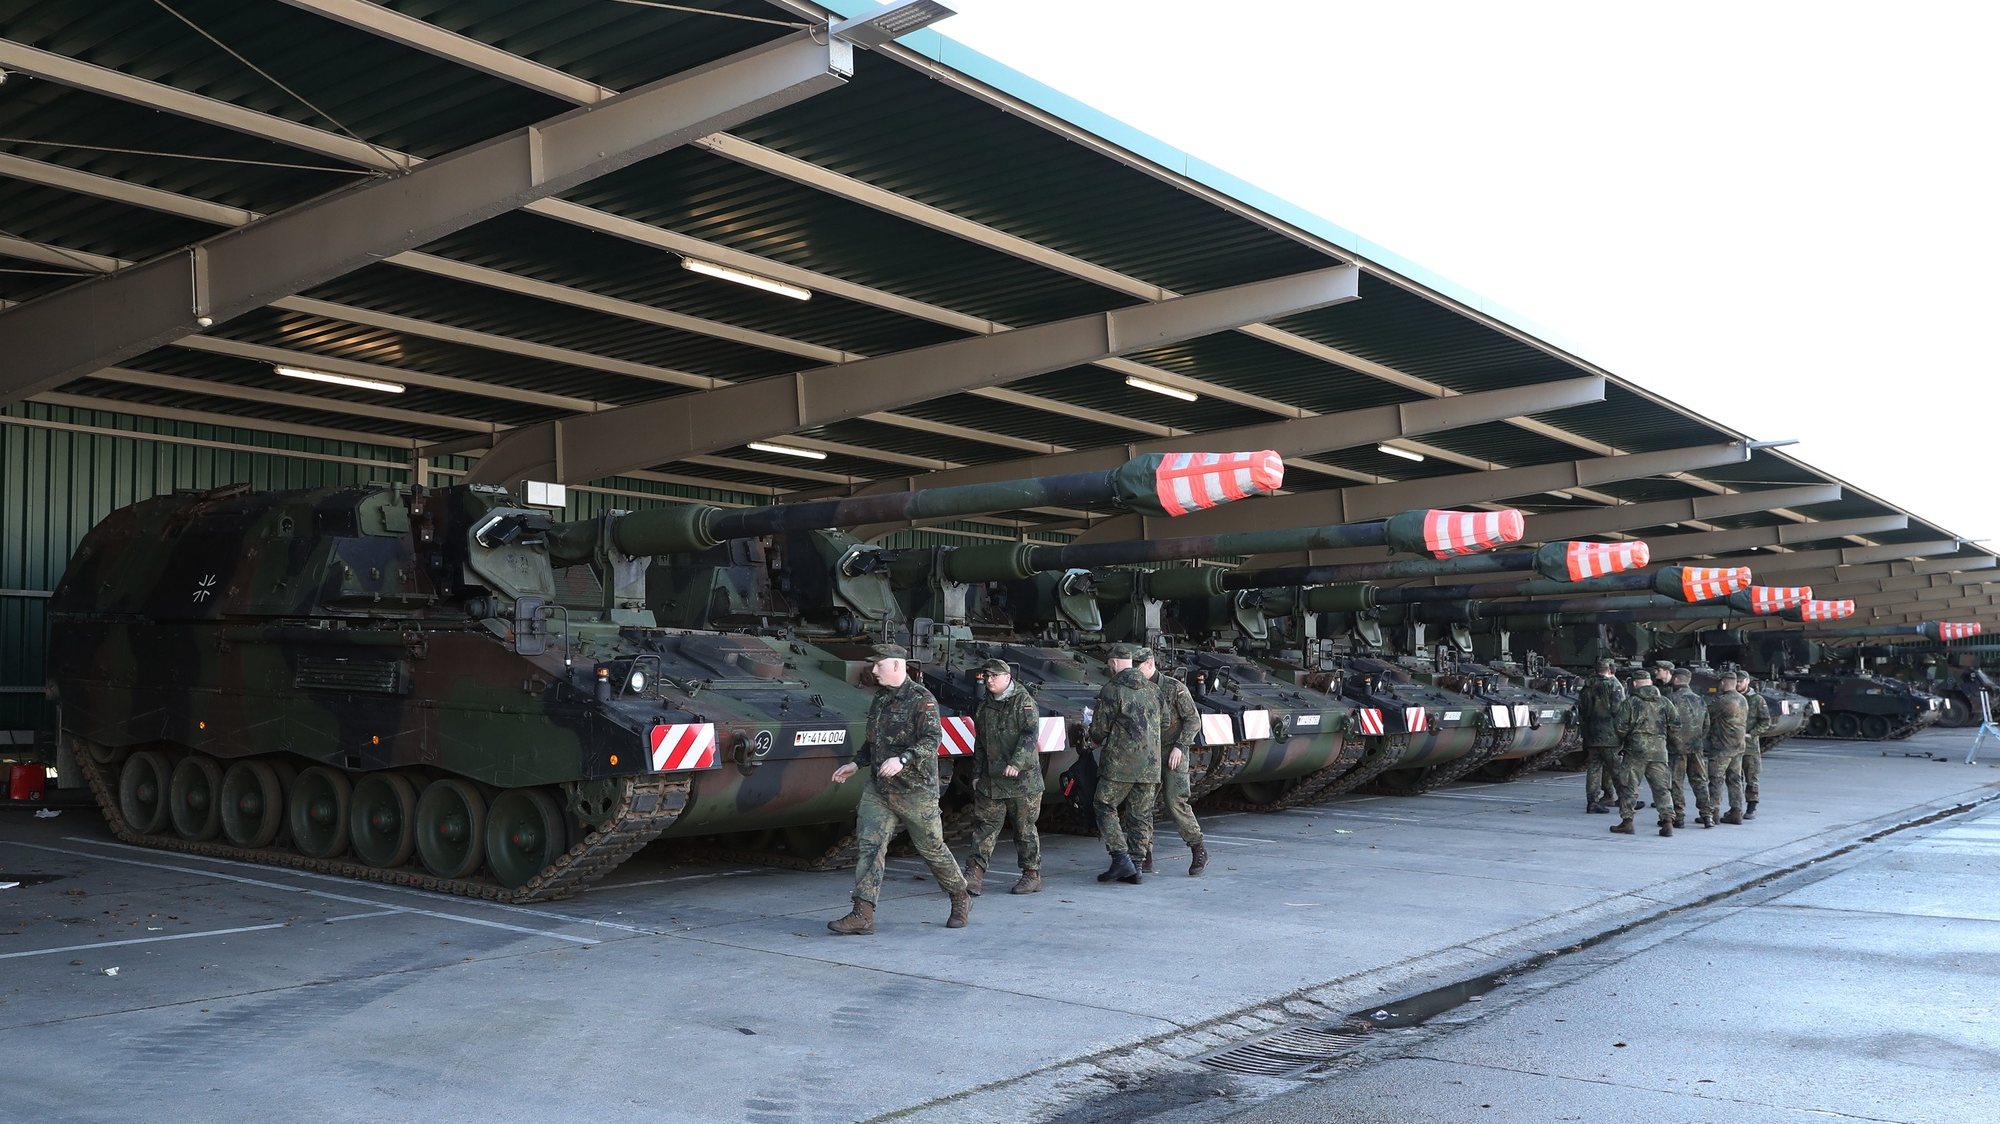 epa09755591 Self-propelled howitzers type Panzerhaubitze PzH 2000 of the German Army are prepared before being loaded onto trucks at the Hindenburg barracks in Munster, northern Germany, 14 February 2022. The German Artillery Support Battalion (Artillerielehrbataillon) 325 will send six of its cannons to Lithuania where 350 additional soldiers with about 100 vehicles will reinforce the German troops taking part in the  NATO mission Enhanced Forward Presence (EFP).  EPA/FOCKE STRANGMANN